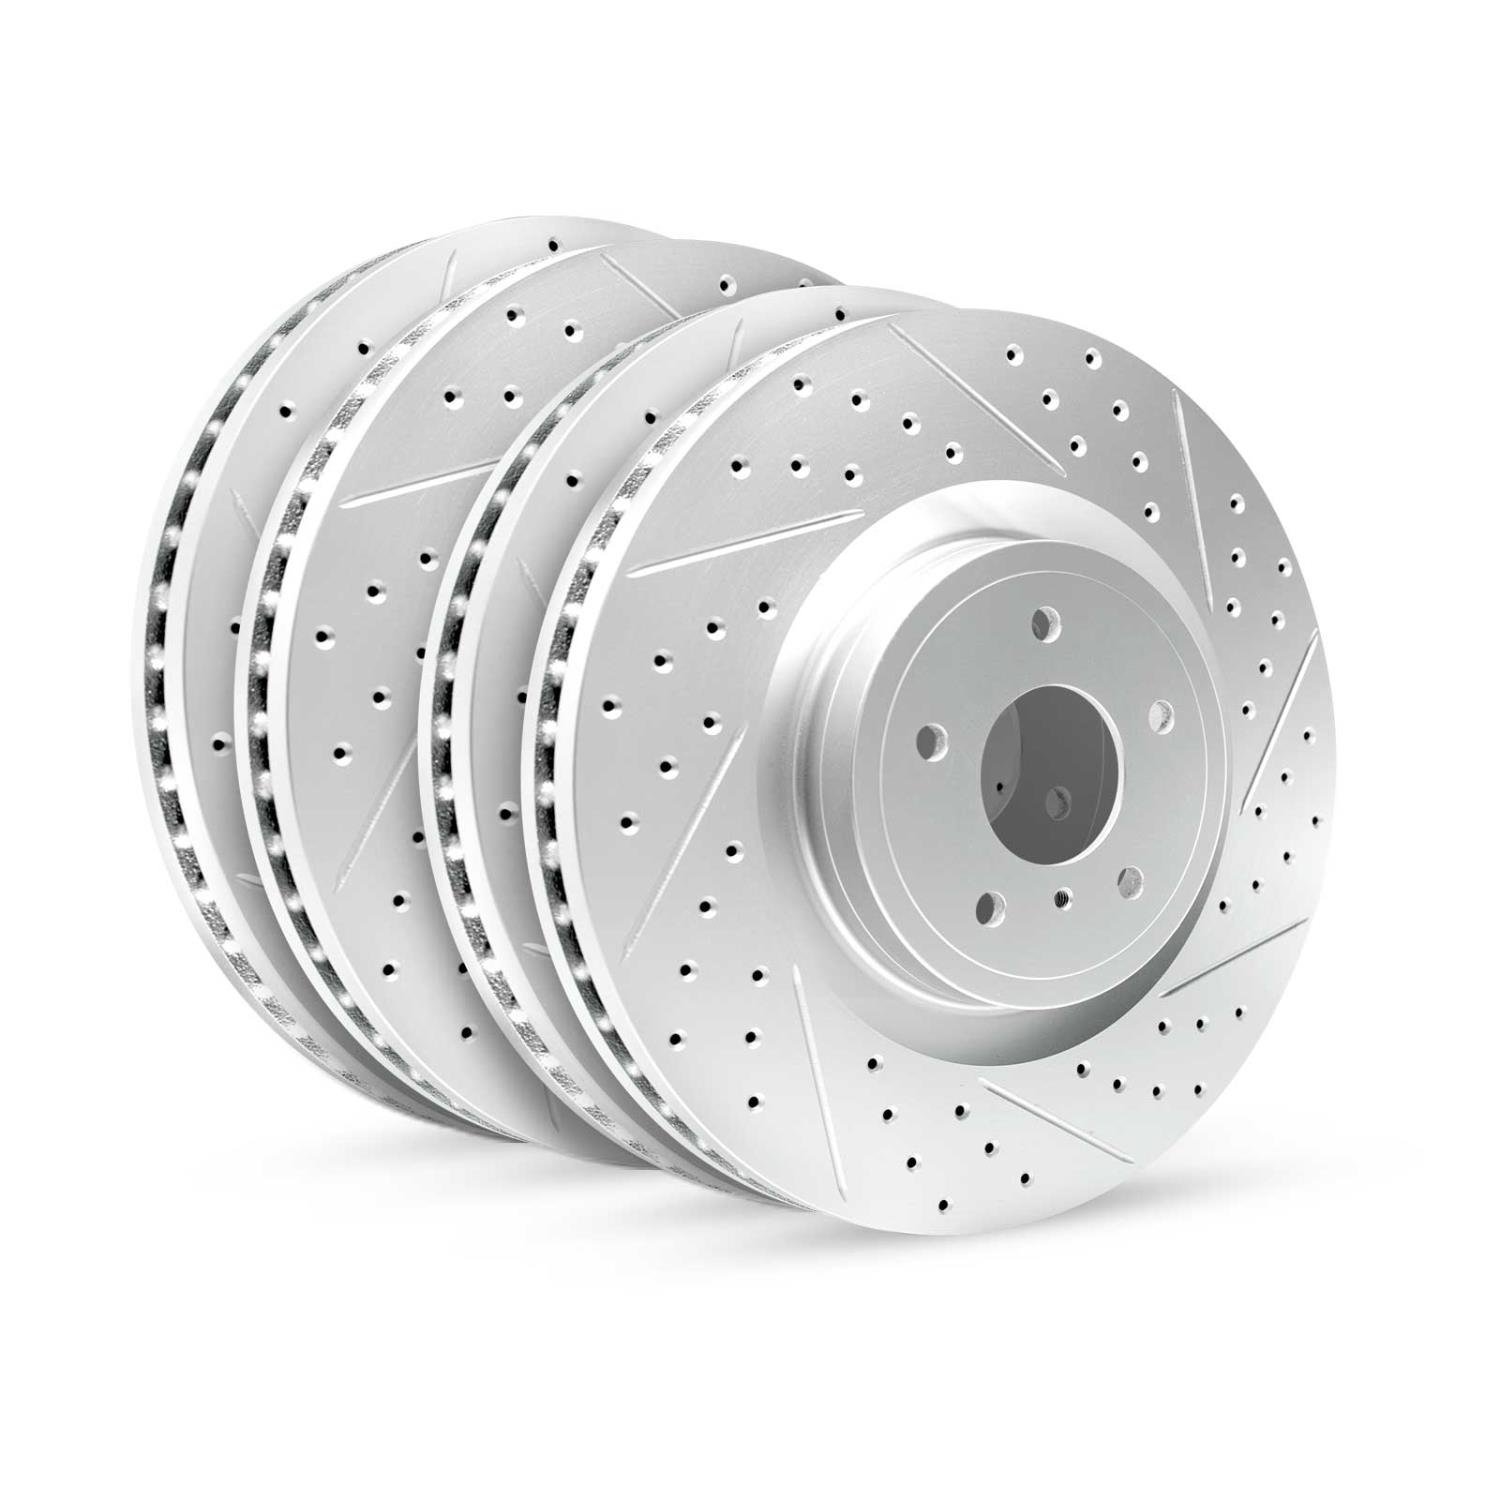 GEO-Carbon Drilled/Slotted Rotors, 2013-2020 BMW, Position: Front/Rear